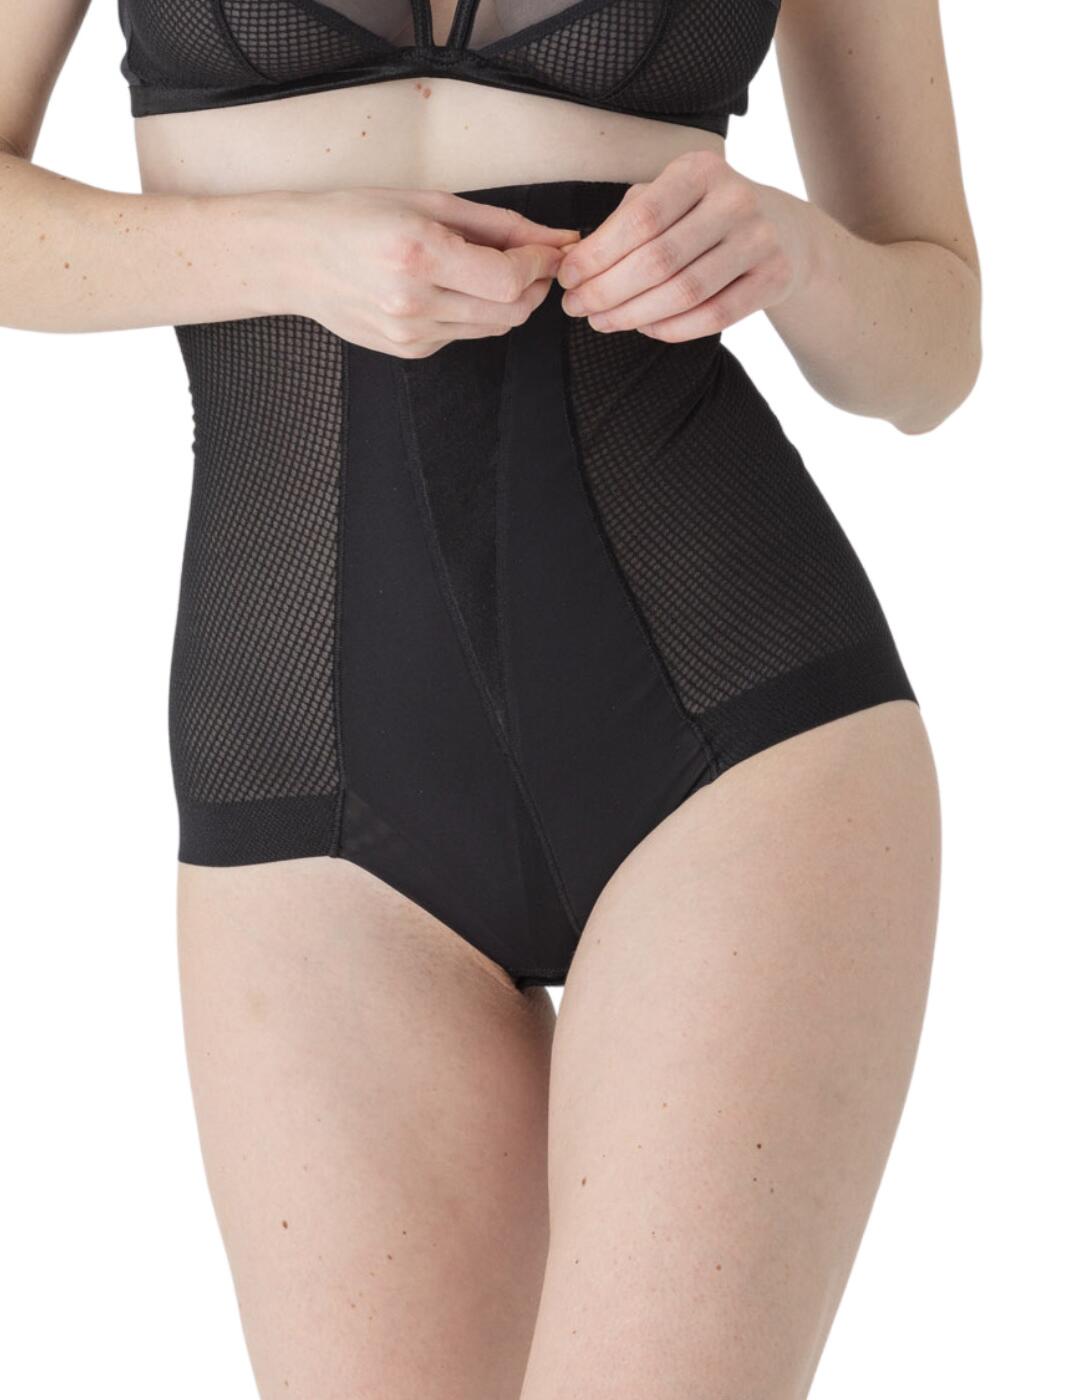 Maison Lejaby Silhouette High-Waisted Girdle With Removable Straps Black